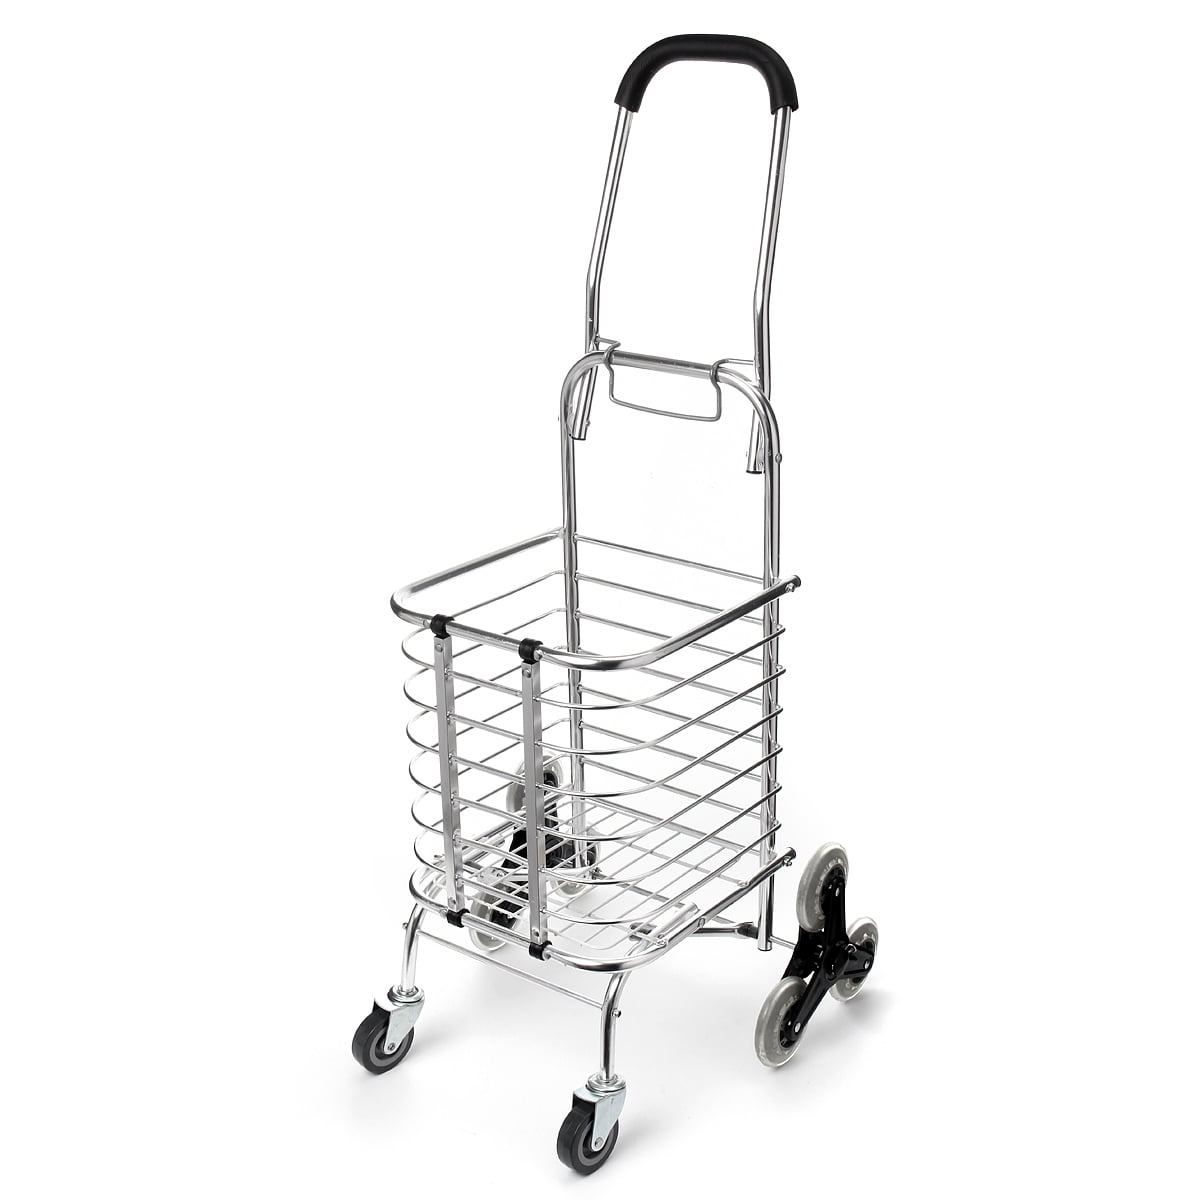 Details about   Adjustable Stair Climbing Folding Climber Hand Truck Portable Dolly Cart Trolley 